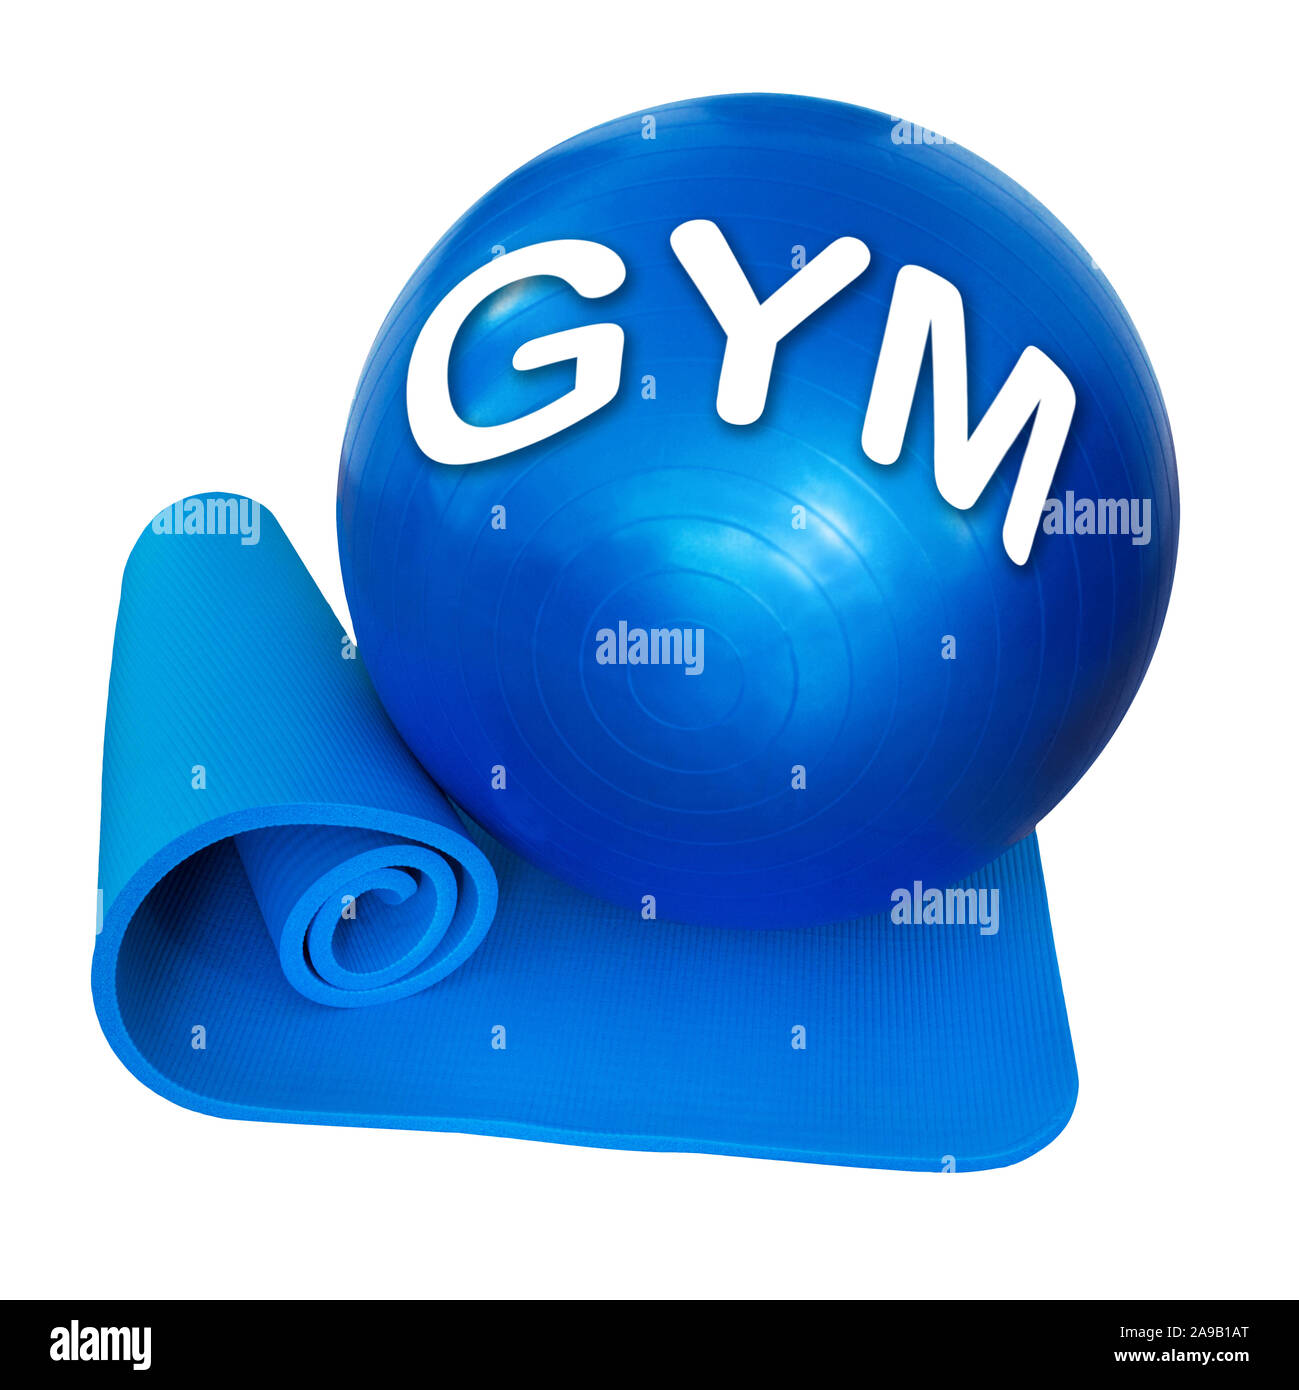 Training mat and gym ball isolated against white background Stock Photo